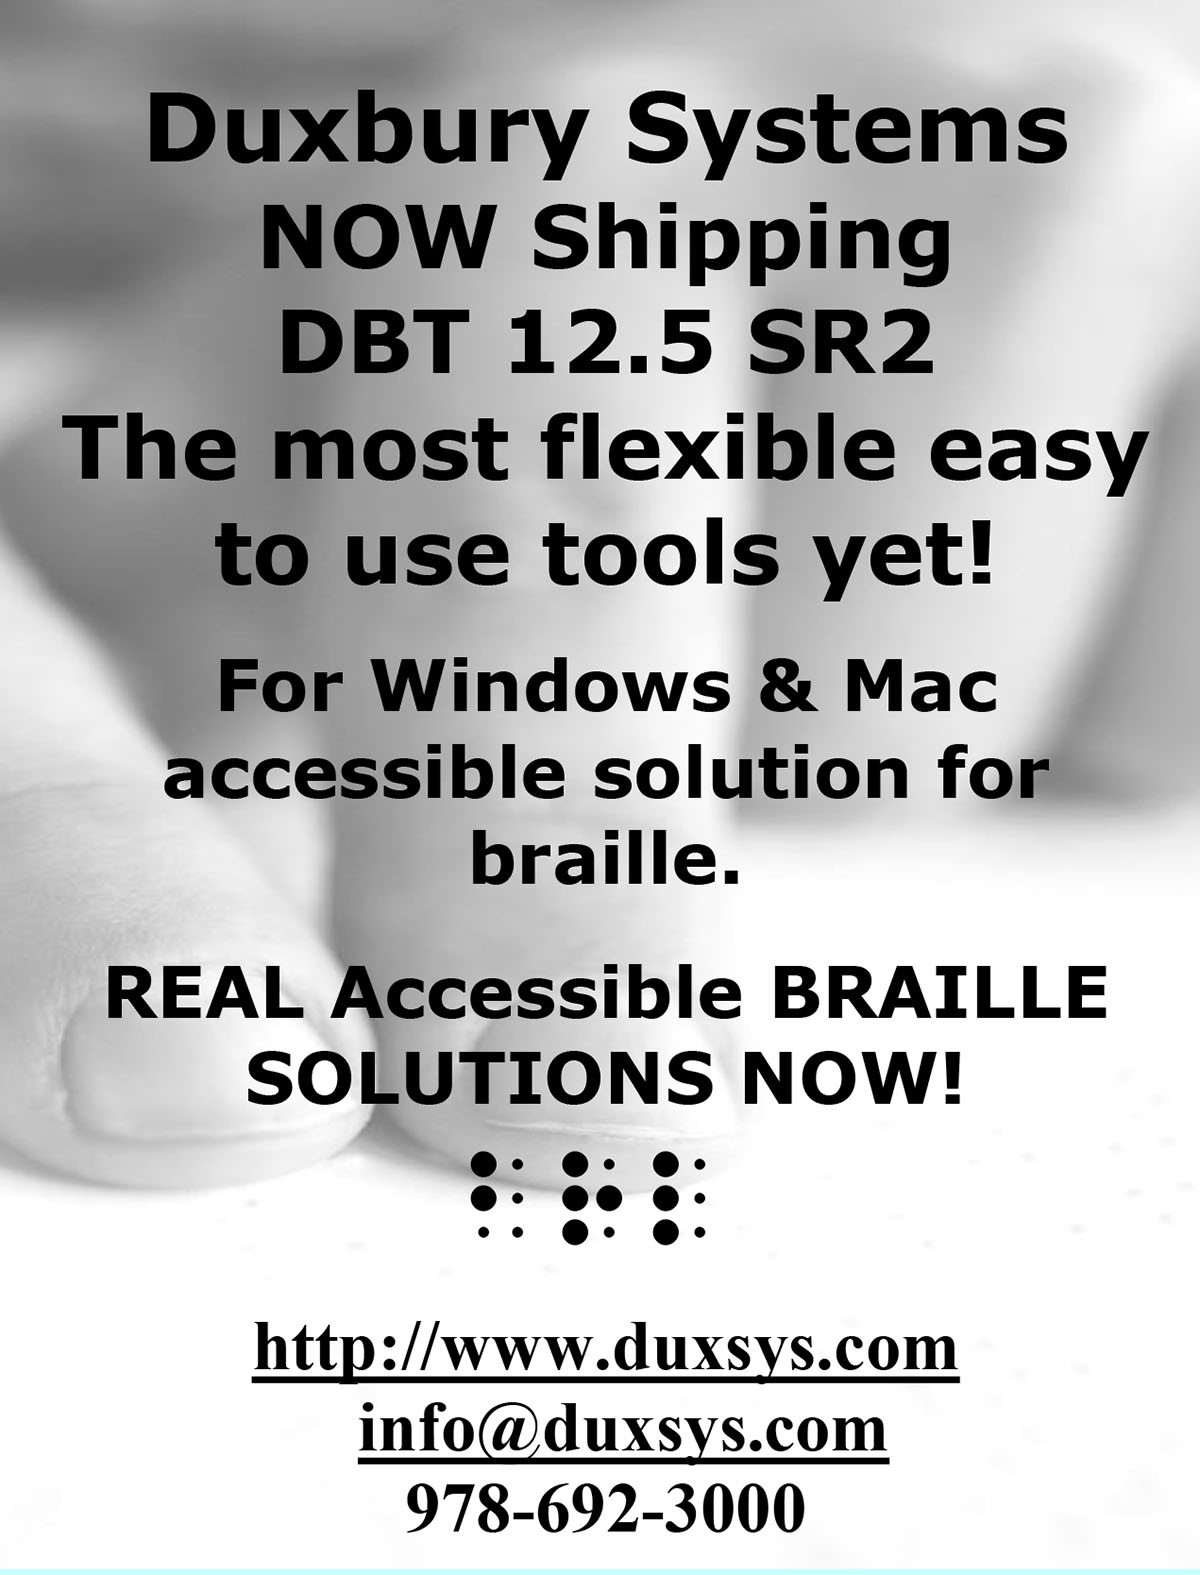 Duxbury Systems NOW Shipping DBT 12.5 SR2. The most flexible easy to use tools yet! For Windows & Mac accessible solution for braille. REAL Accessible BRAILLE SOLUTIONS NOW! http://www.duxsys.com | info@duxsys.com | 978-692-3000.